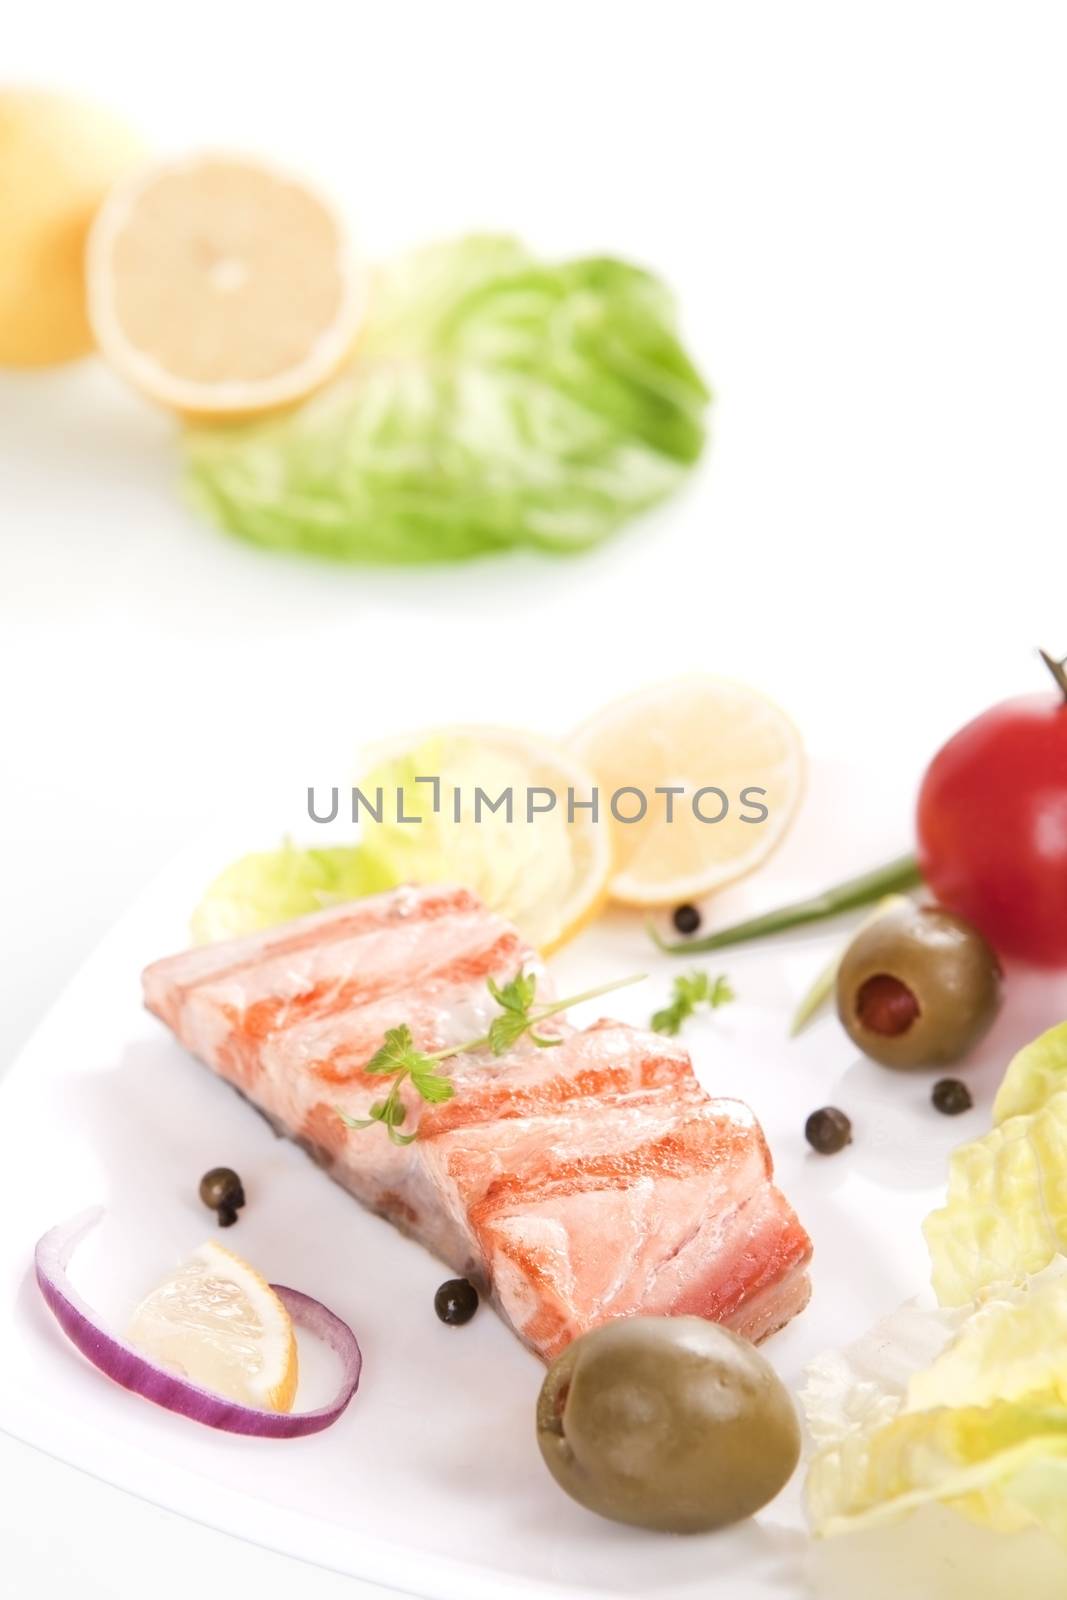 Grilled salmon steak piece with olives, salad, onion and lemon.